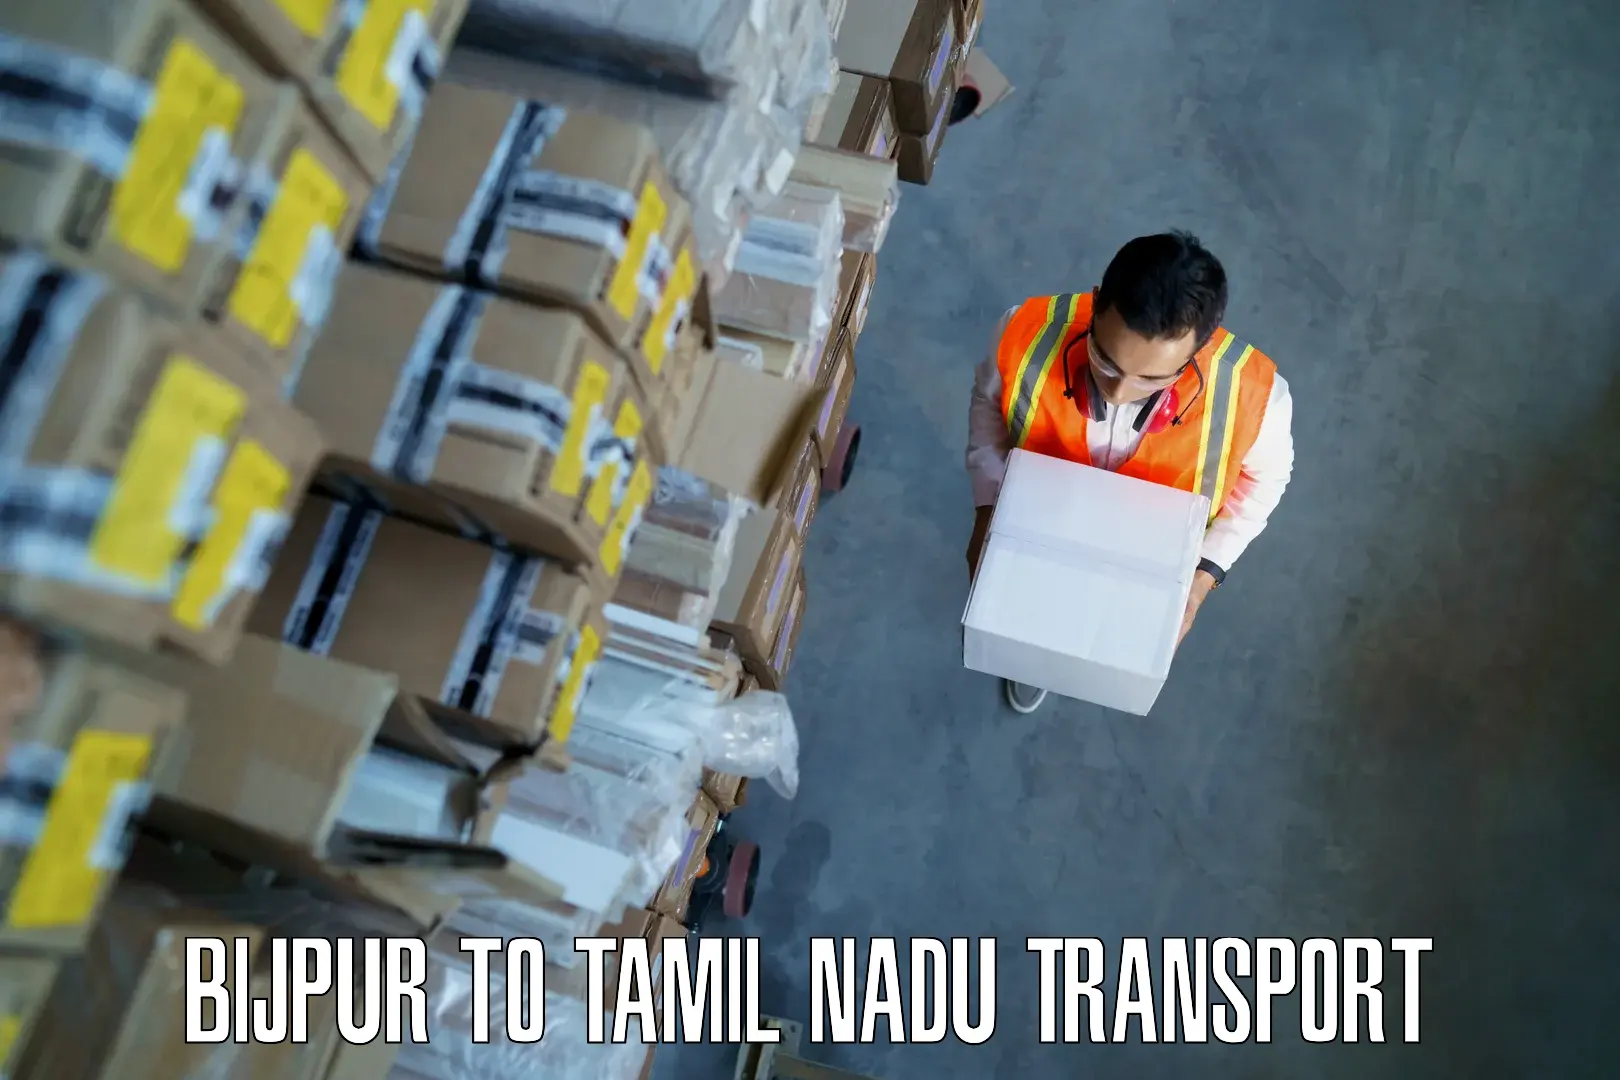 Shipping services Bijpur to Trichy